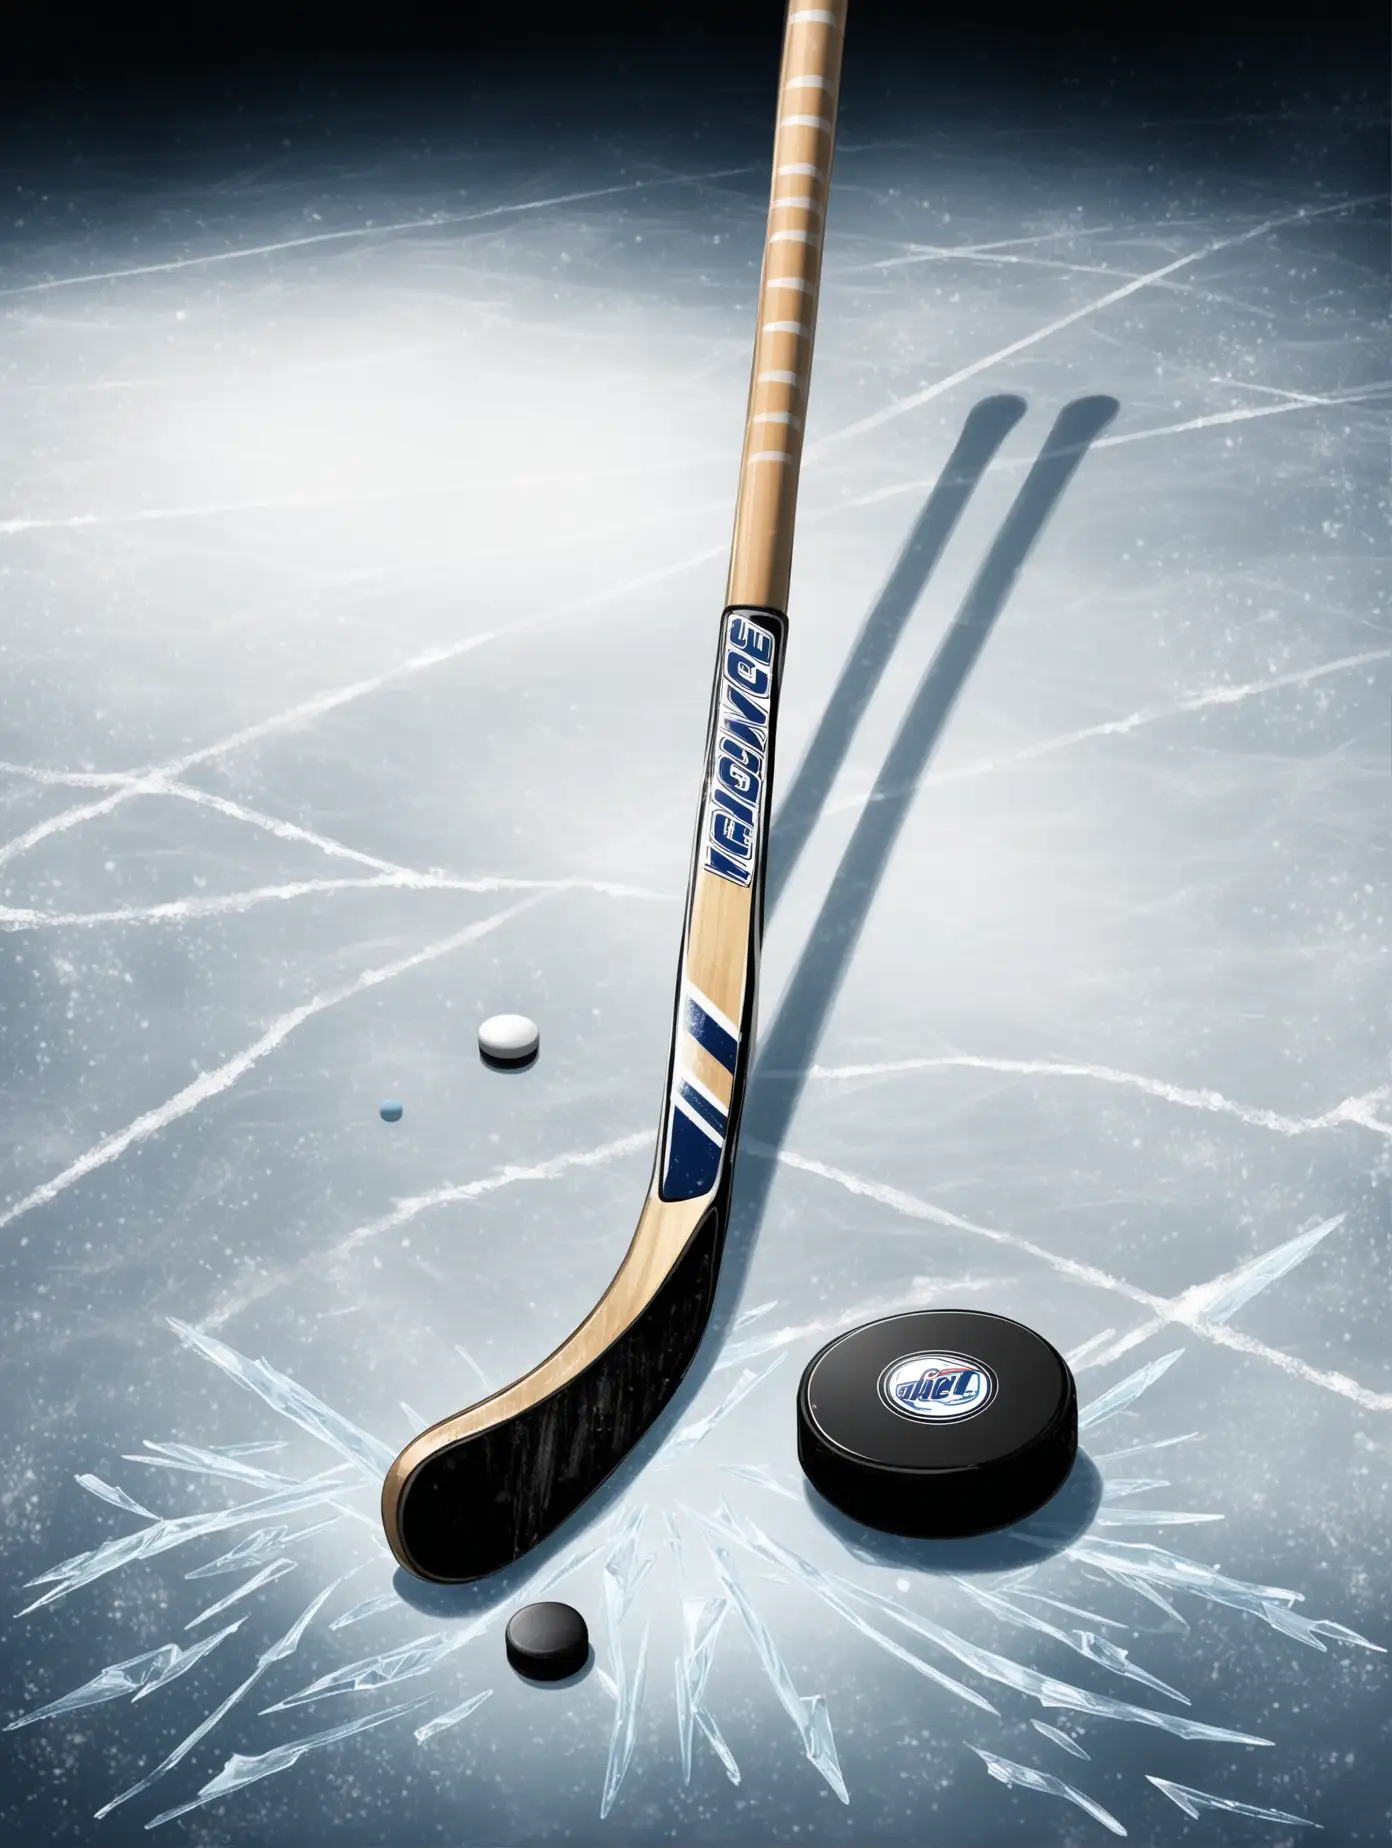 Ice Hockey Stick and Puck in Action on Rink